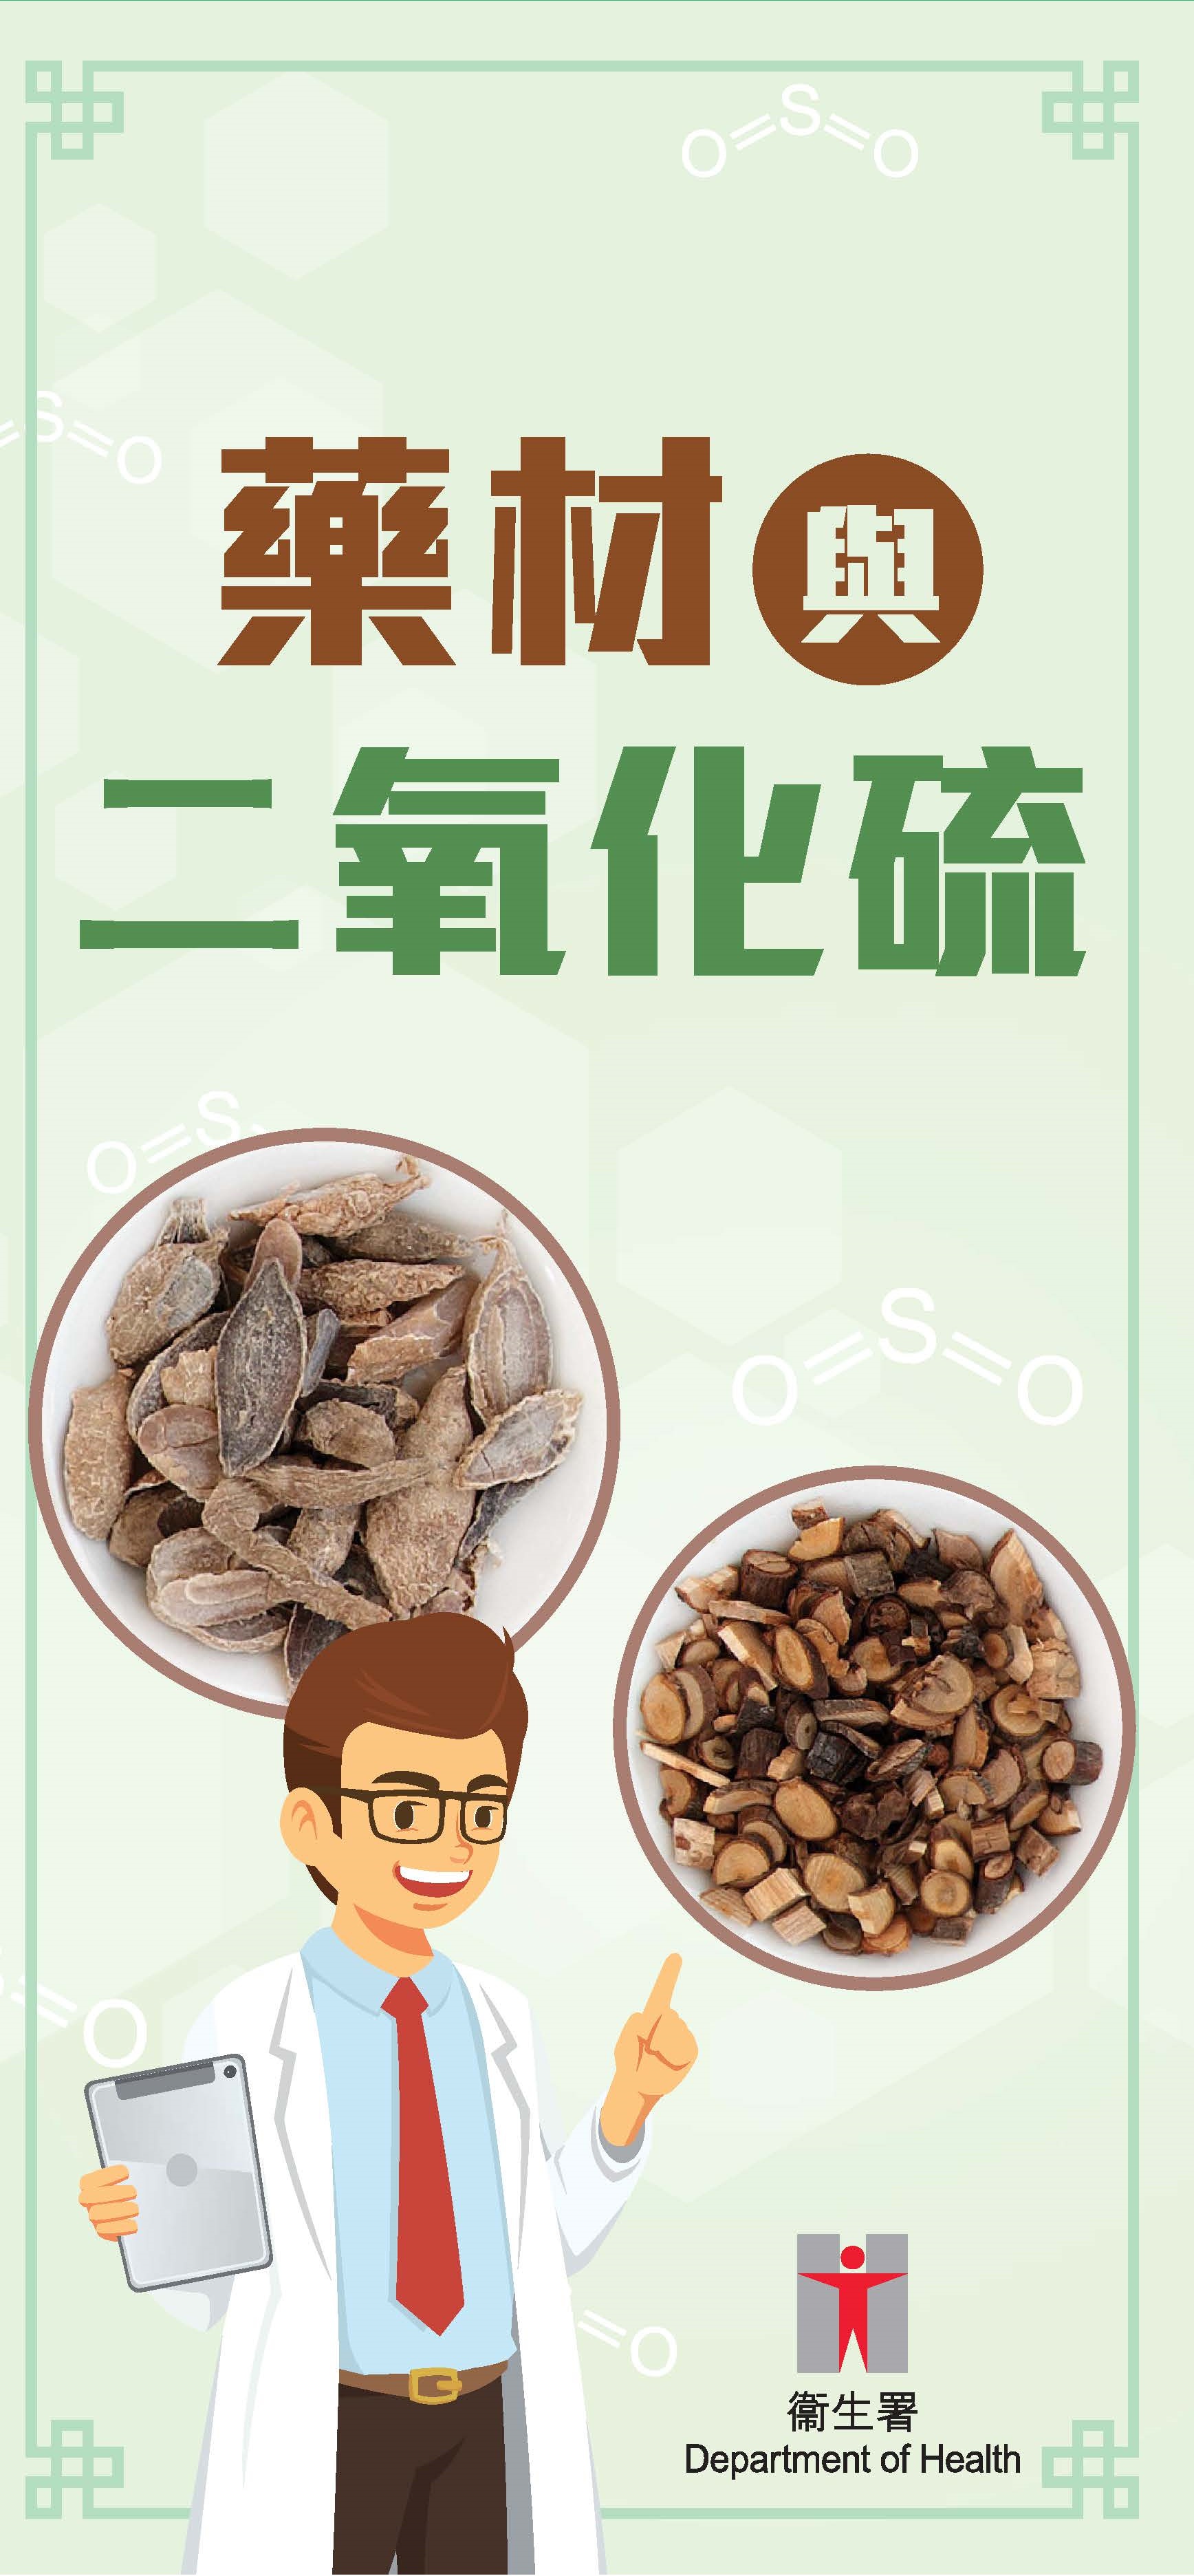 Herbal Medicines and Sulphur Dioxide (Chinese version only) 